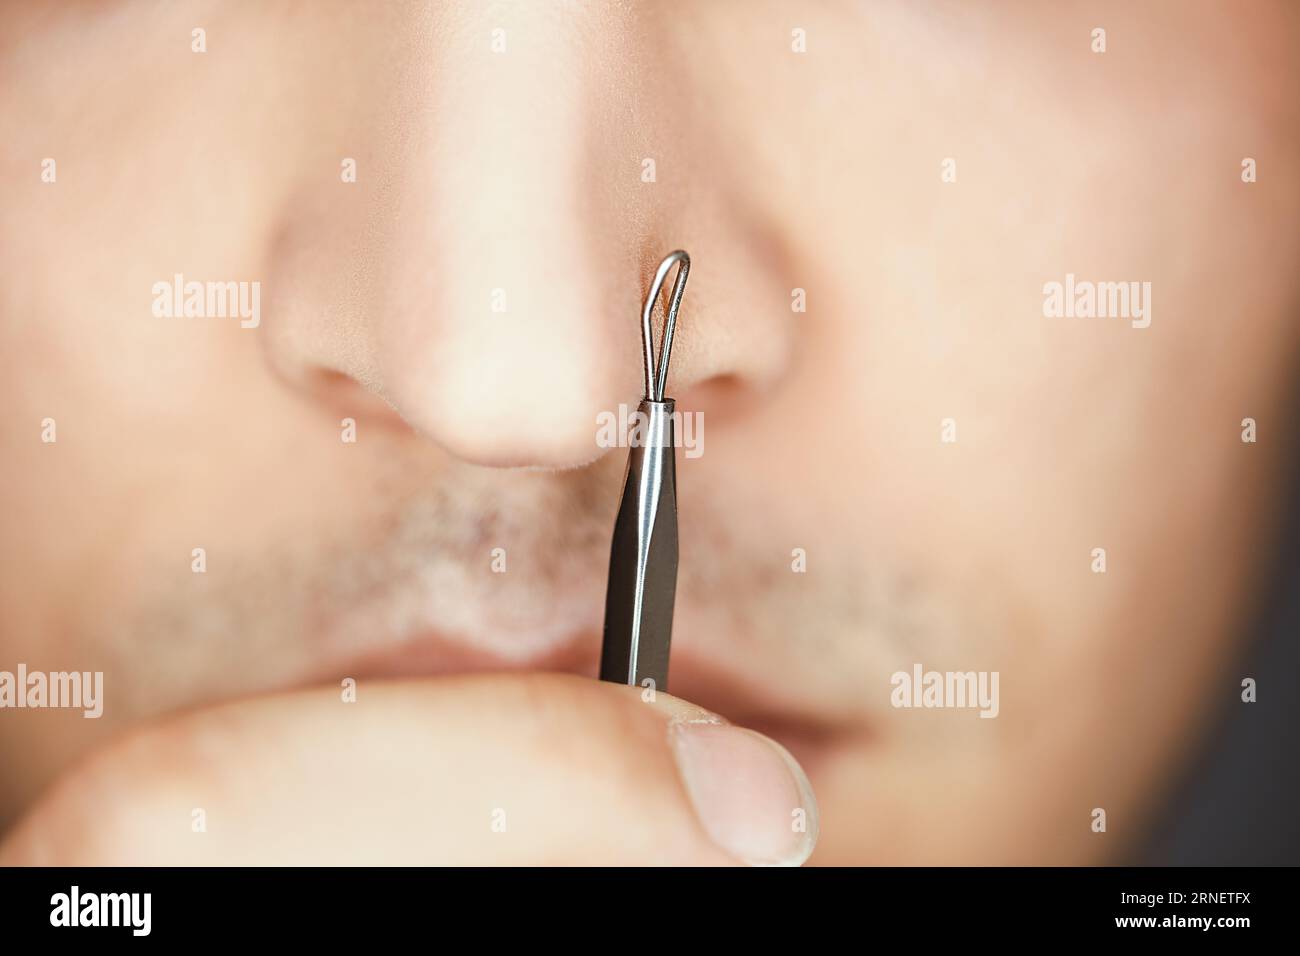 use pimple remover on male skin to care and clean pores and get blackheads out of nose by popping and squeezing them with extractor tool Stock Photo